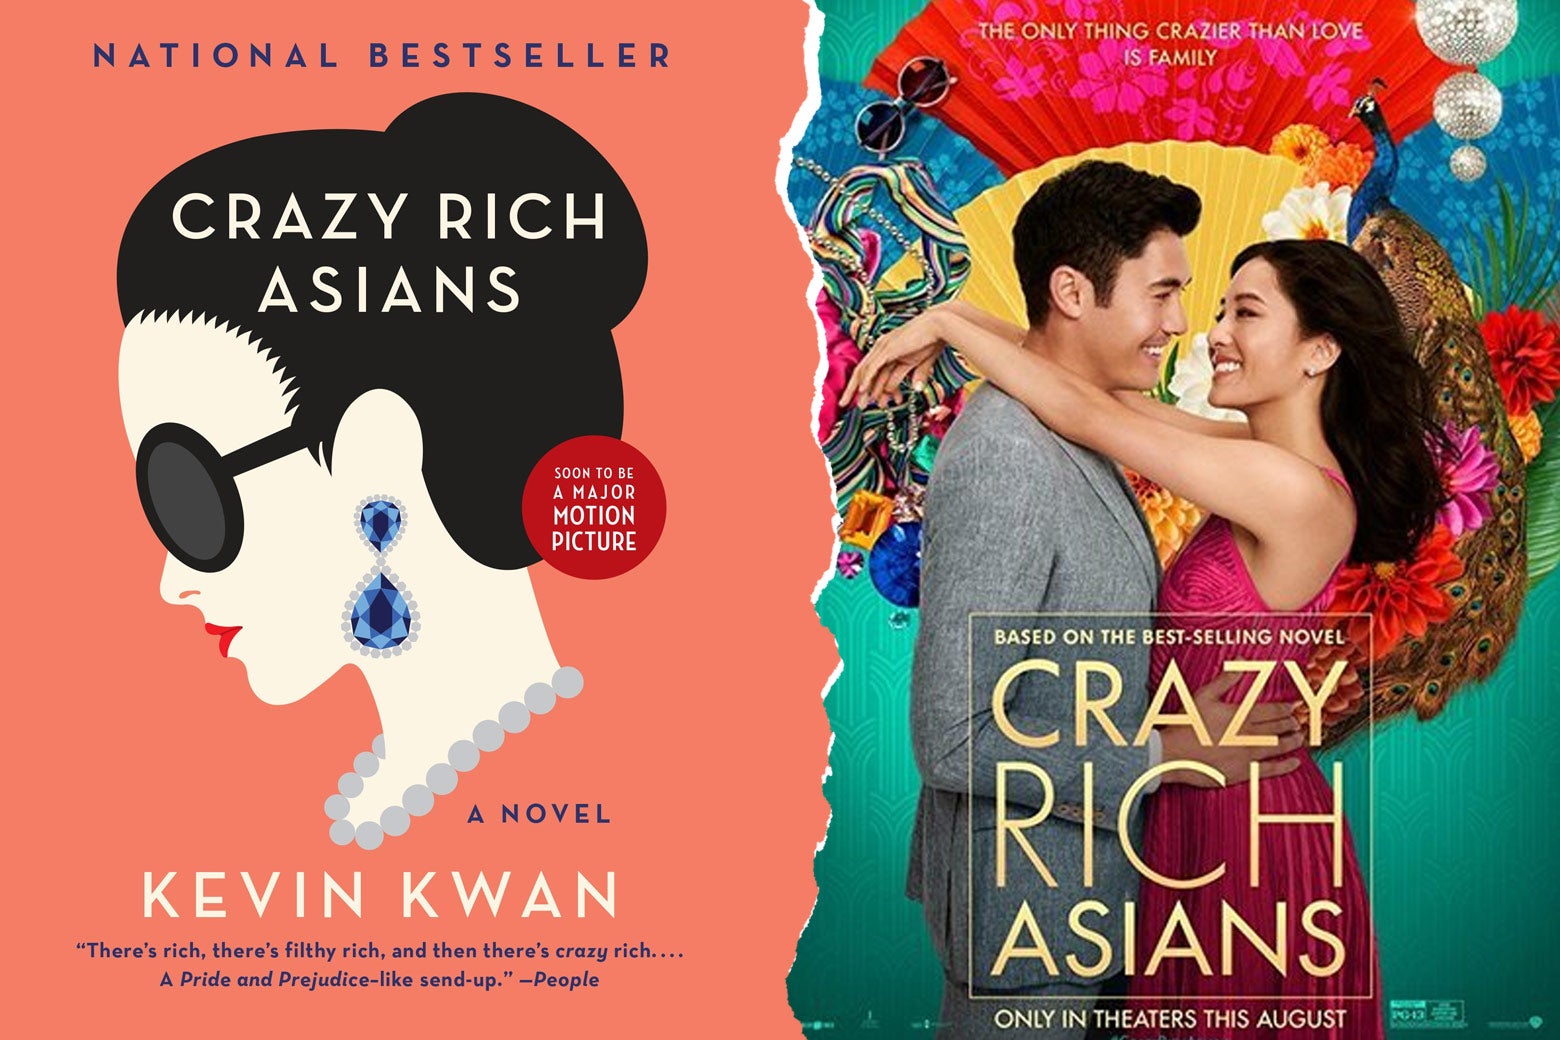 Crazy Rich Asians book cover and movie poster.